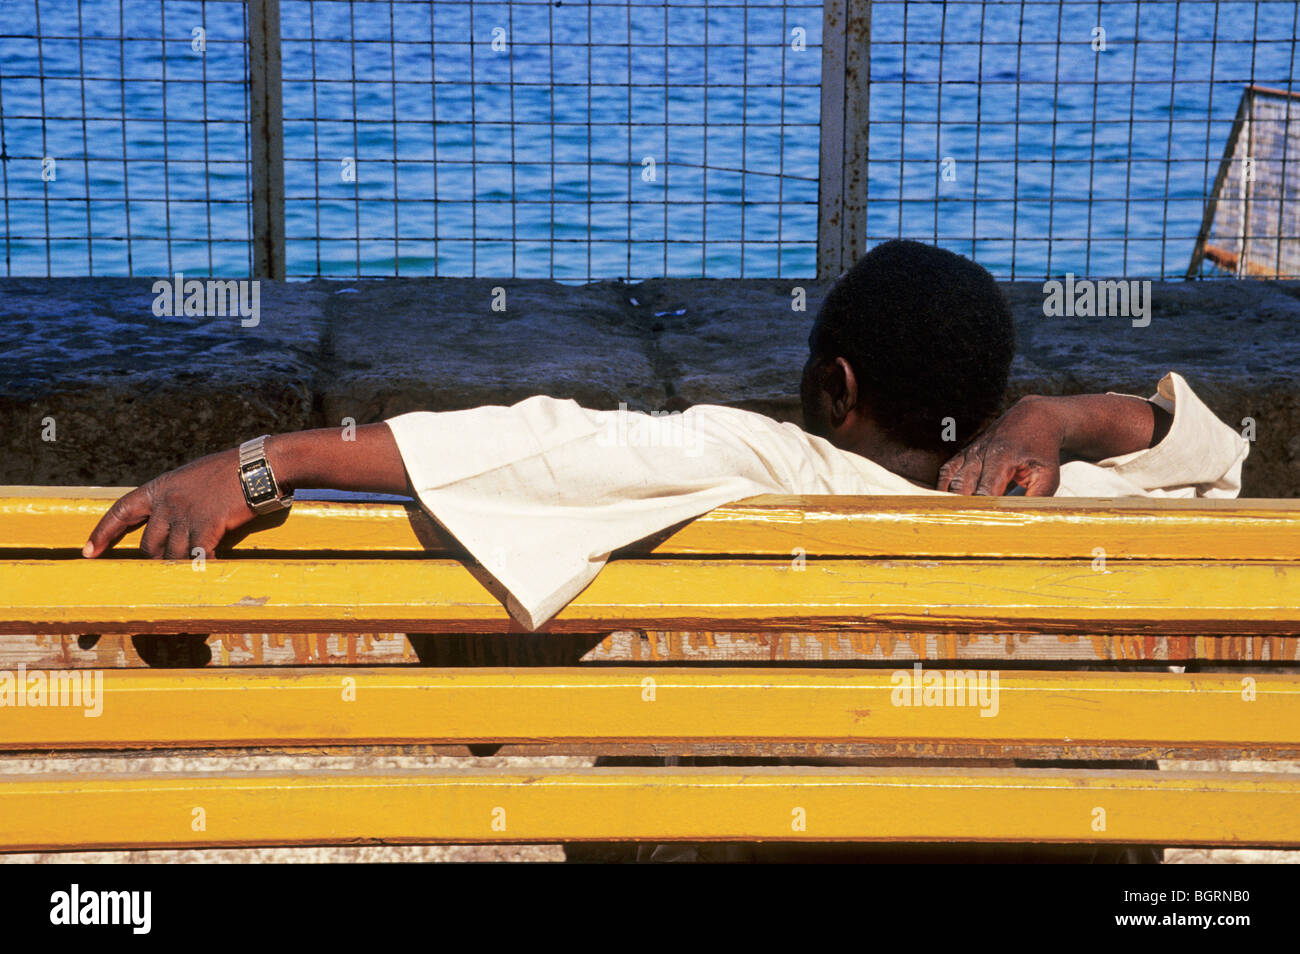 man with wrist watch lying on a yellow bench in Alexandria Egypt Northern Africa Stock Photo